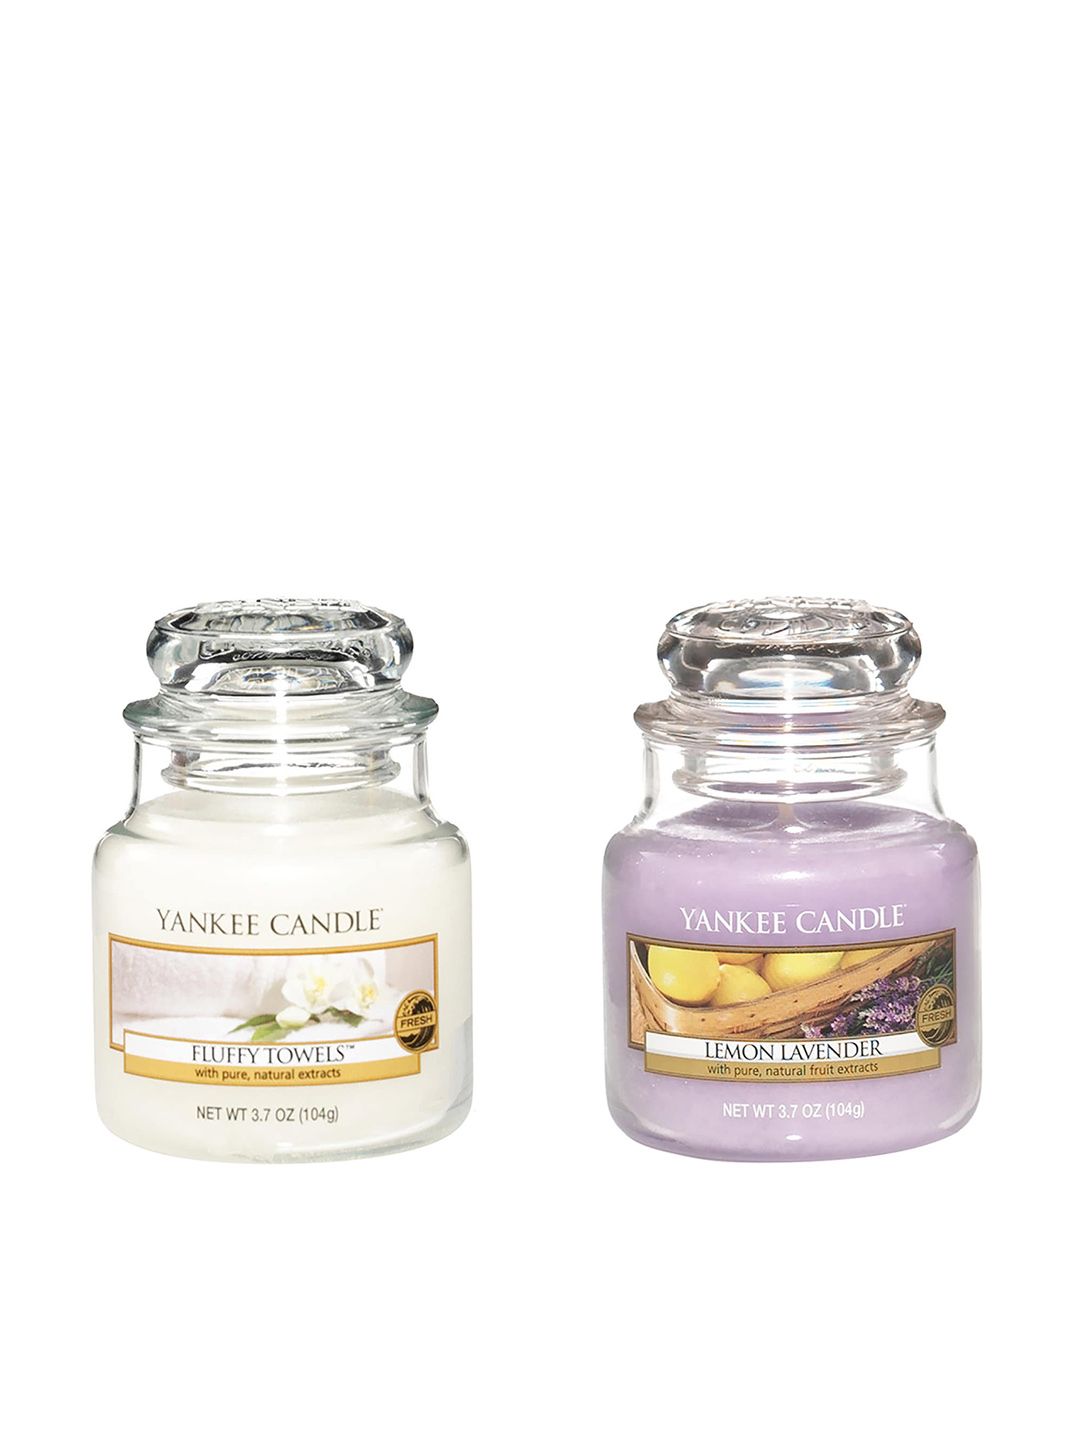 YANKEE CANDLE Set of 2 White & Lavender Classic Jar Scented Candles Price in India